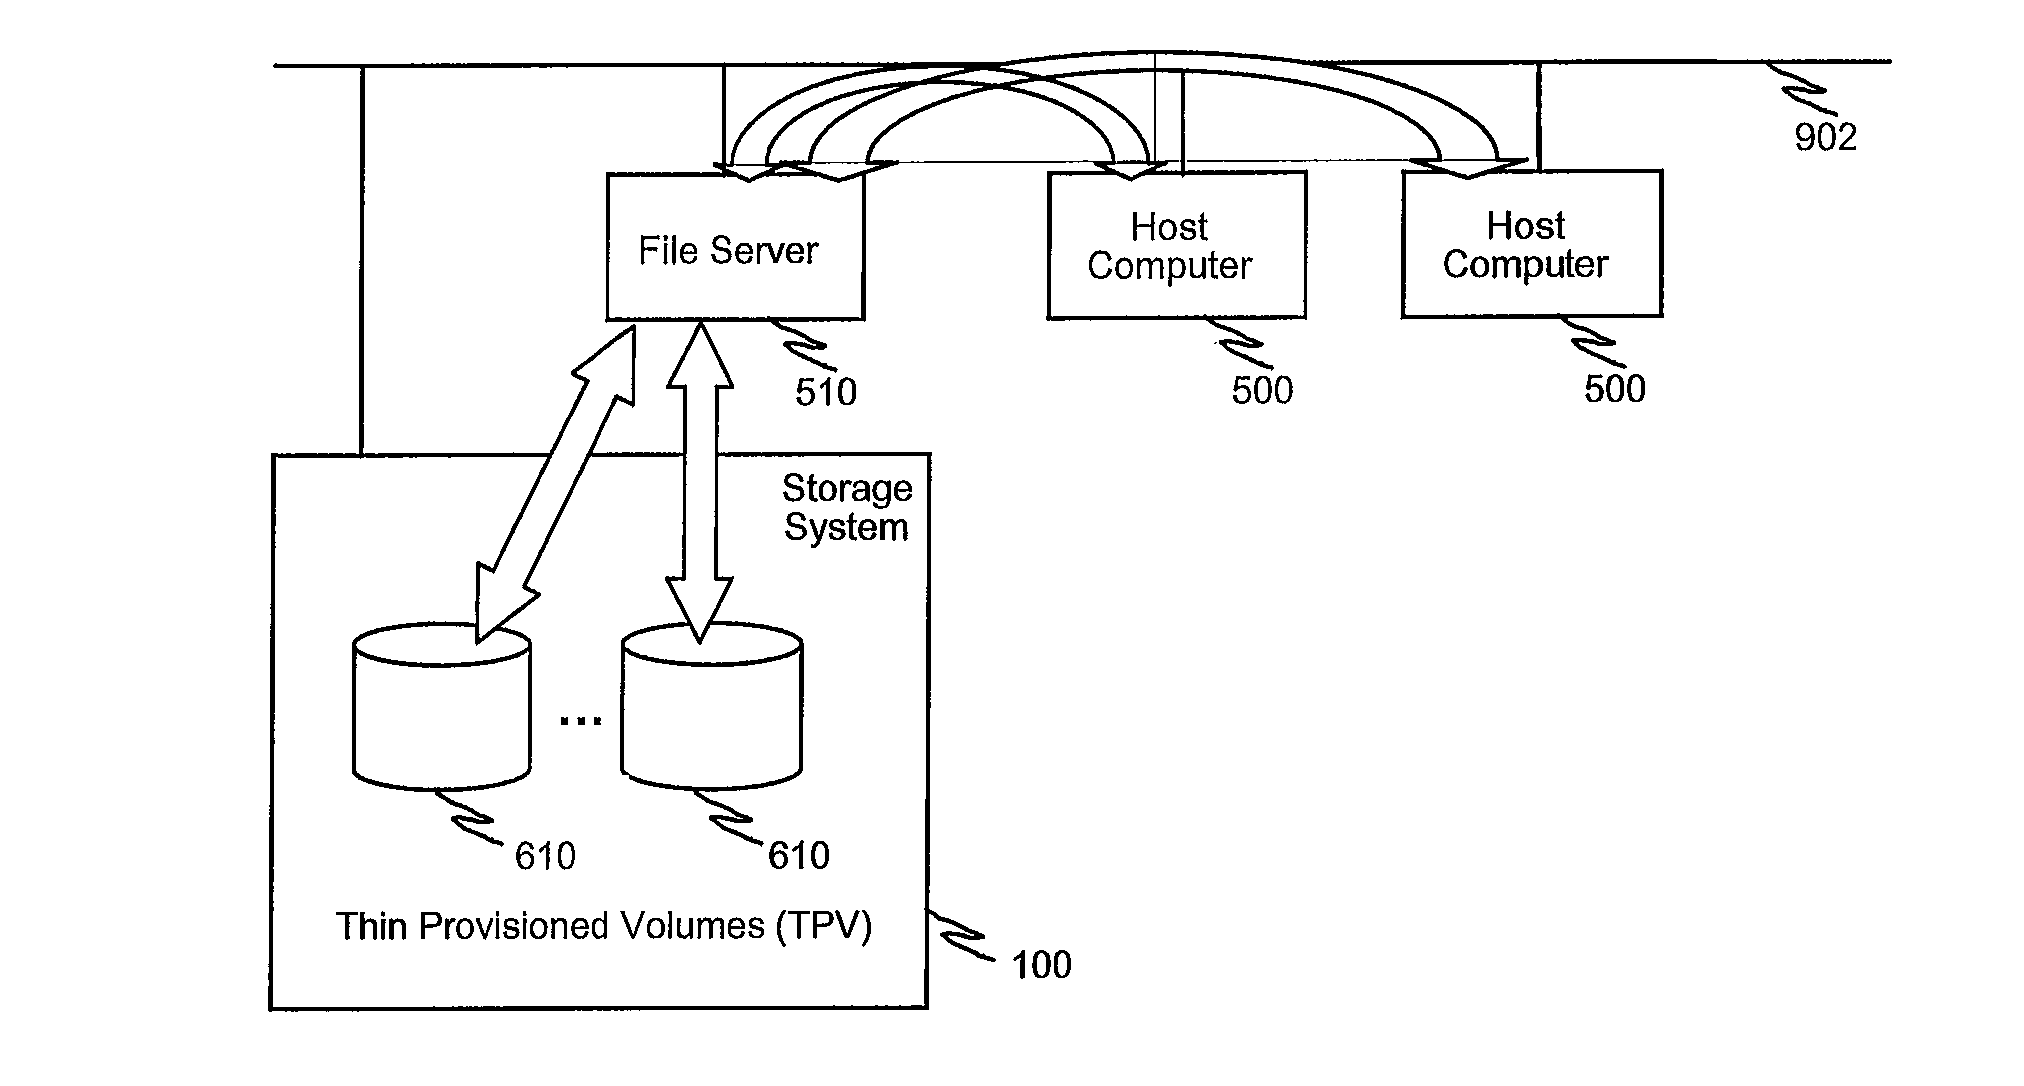 System and method for controlling automated page-based tier management in storage systems